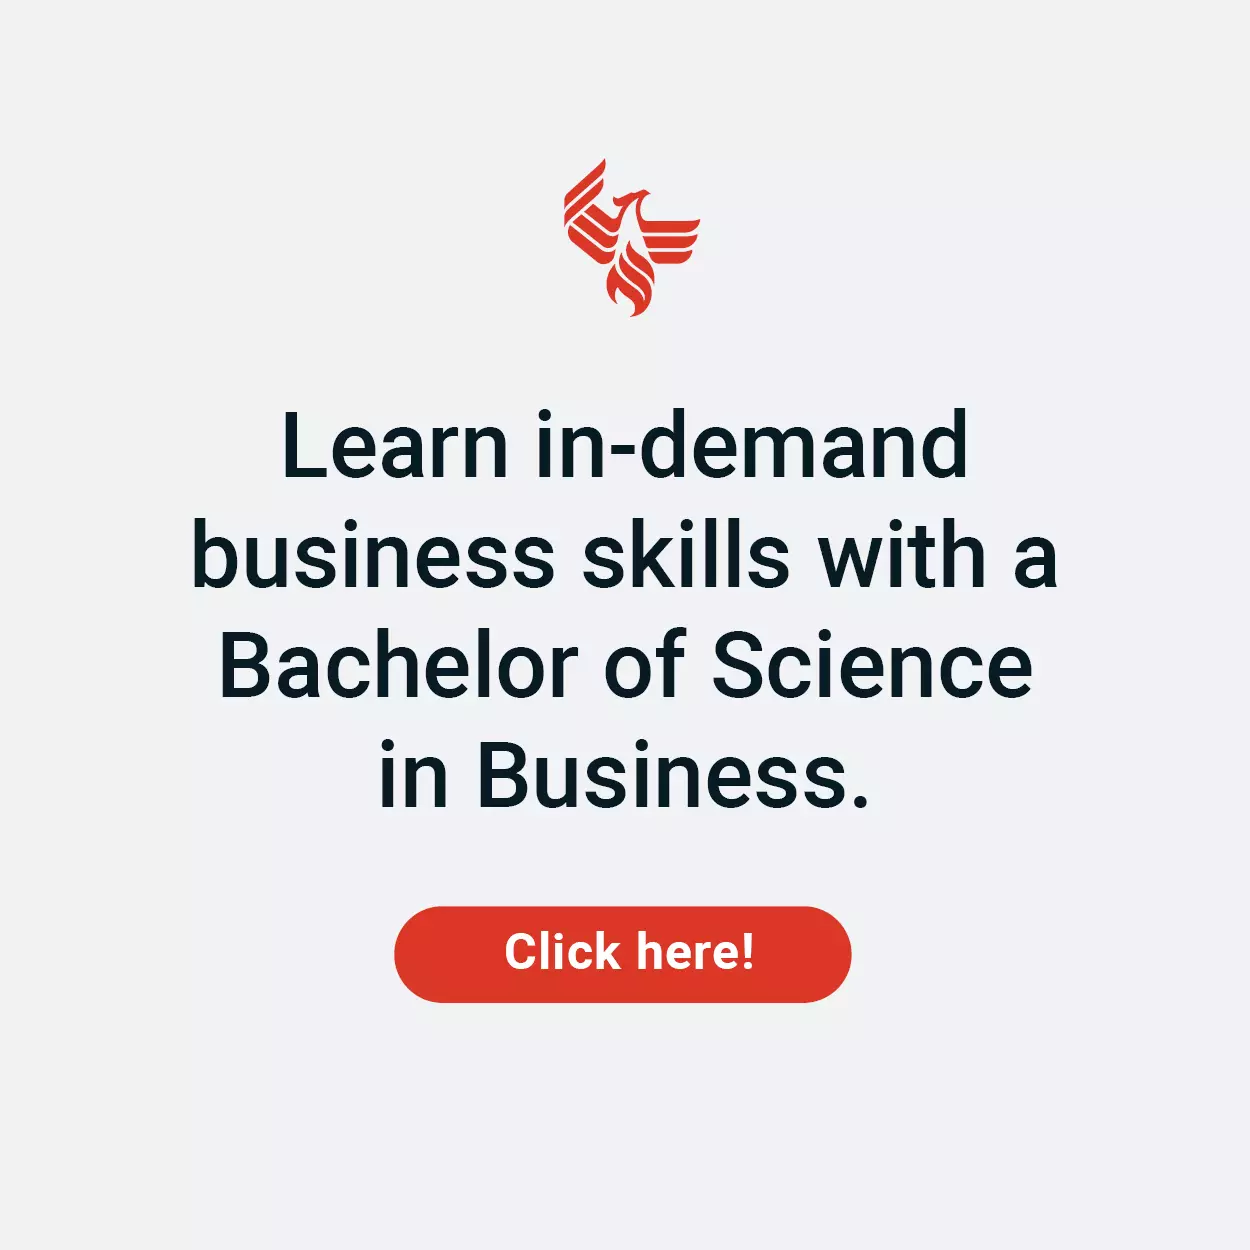 Learn in-demand business skills with a Bachelor of Science in Business. Click here to learn more.